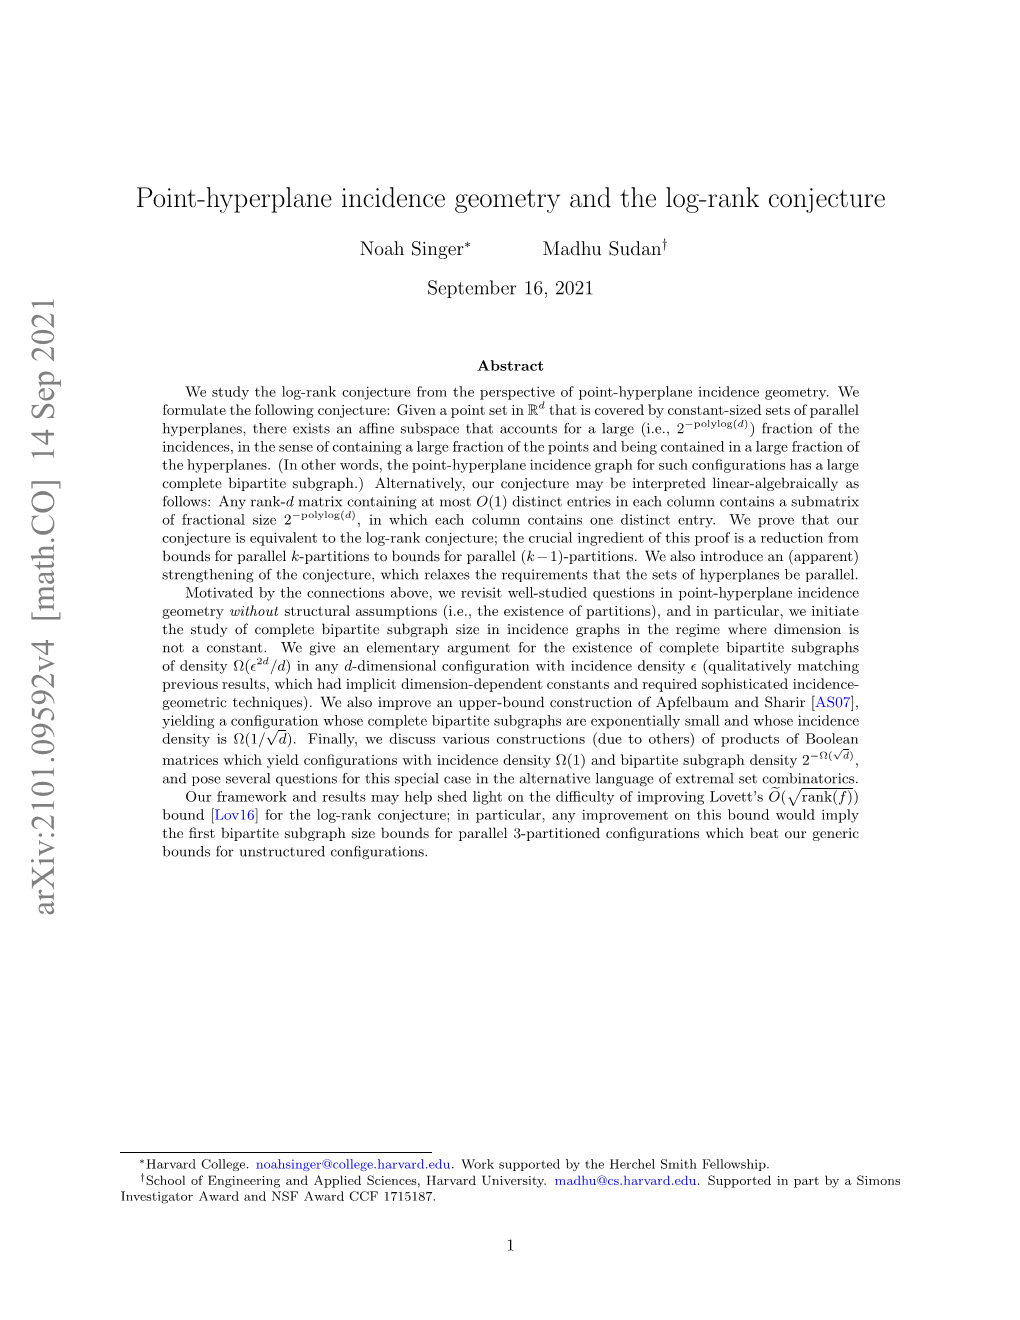 Point-Hyperplane Incidence Geometry and the Log-Rank Conjecture